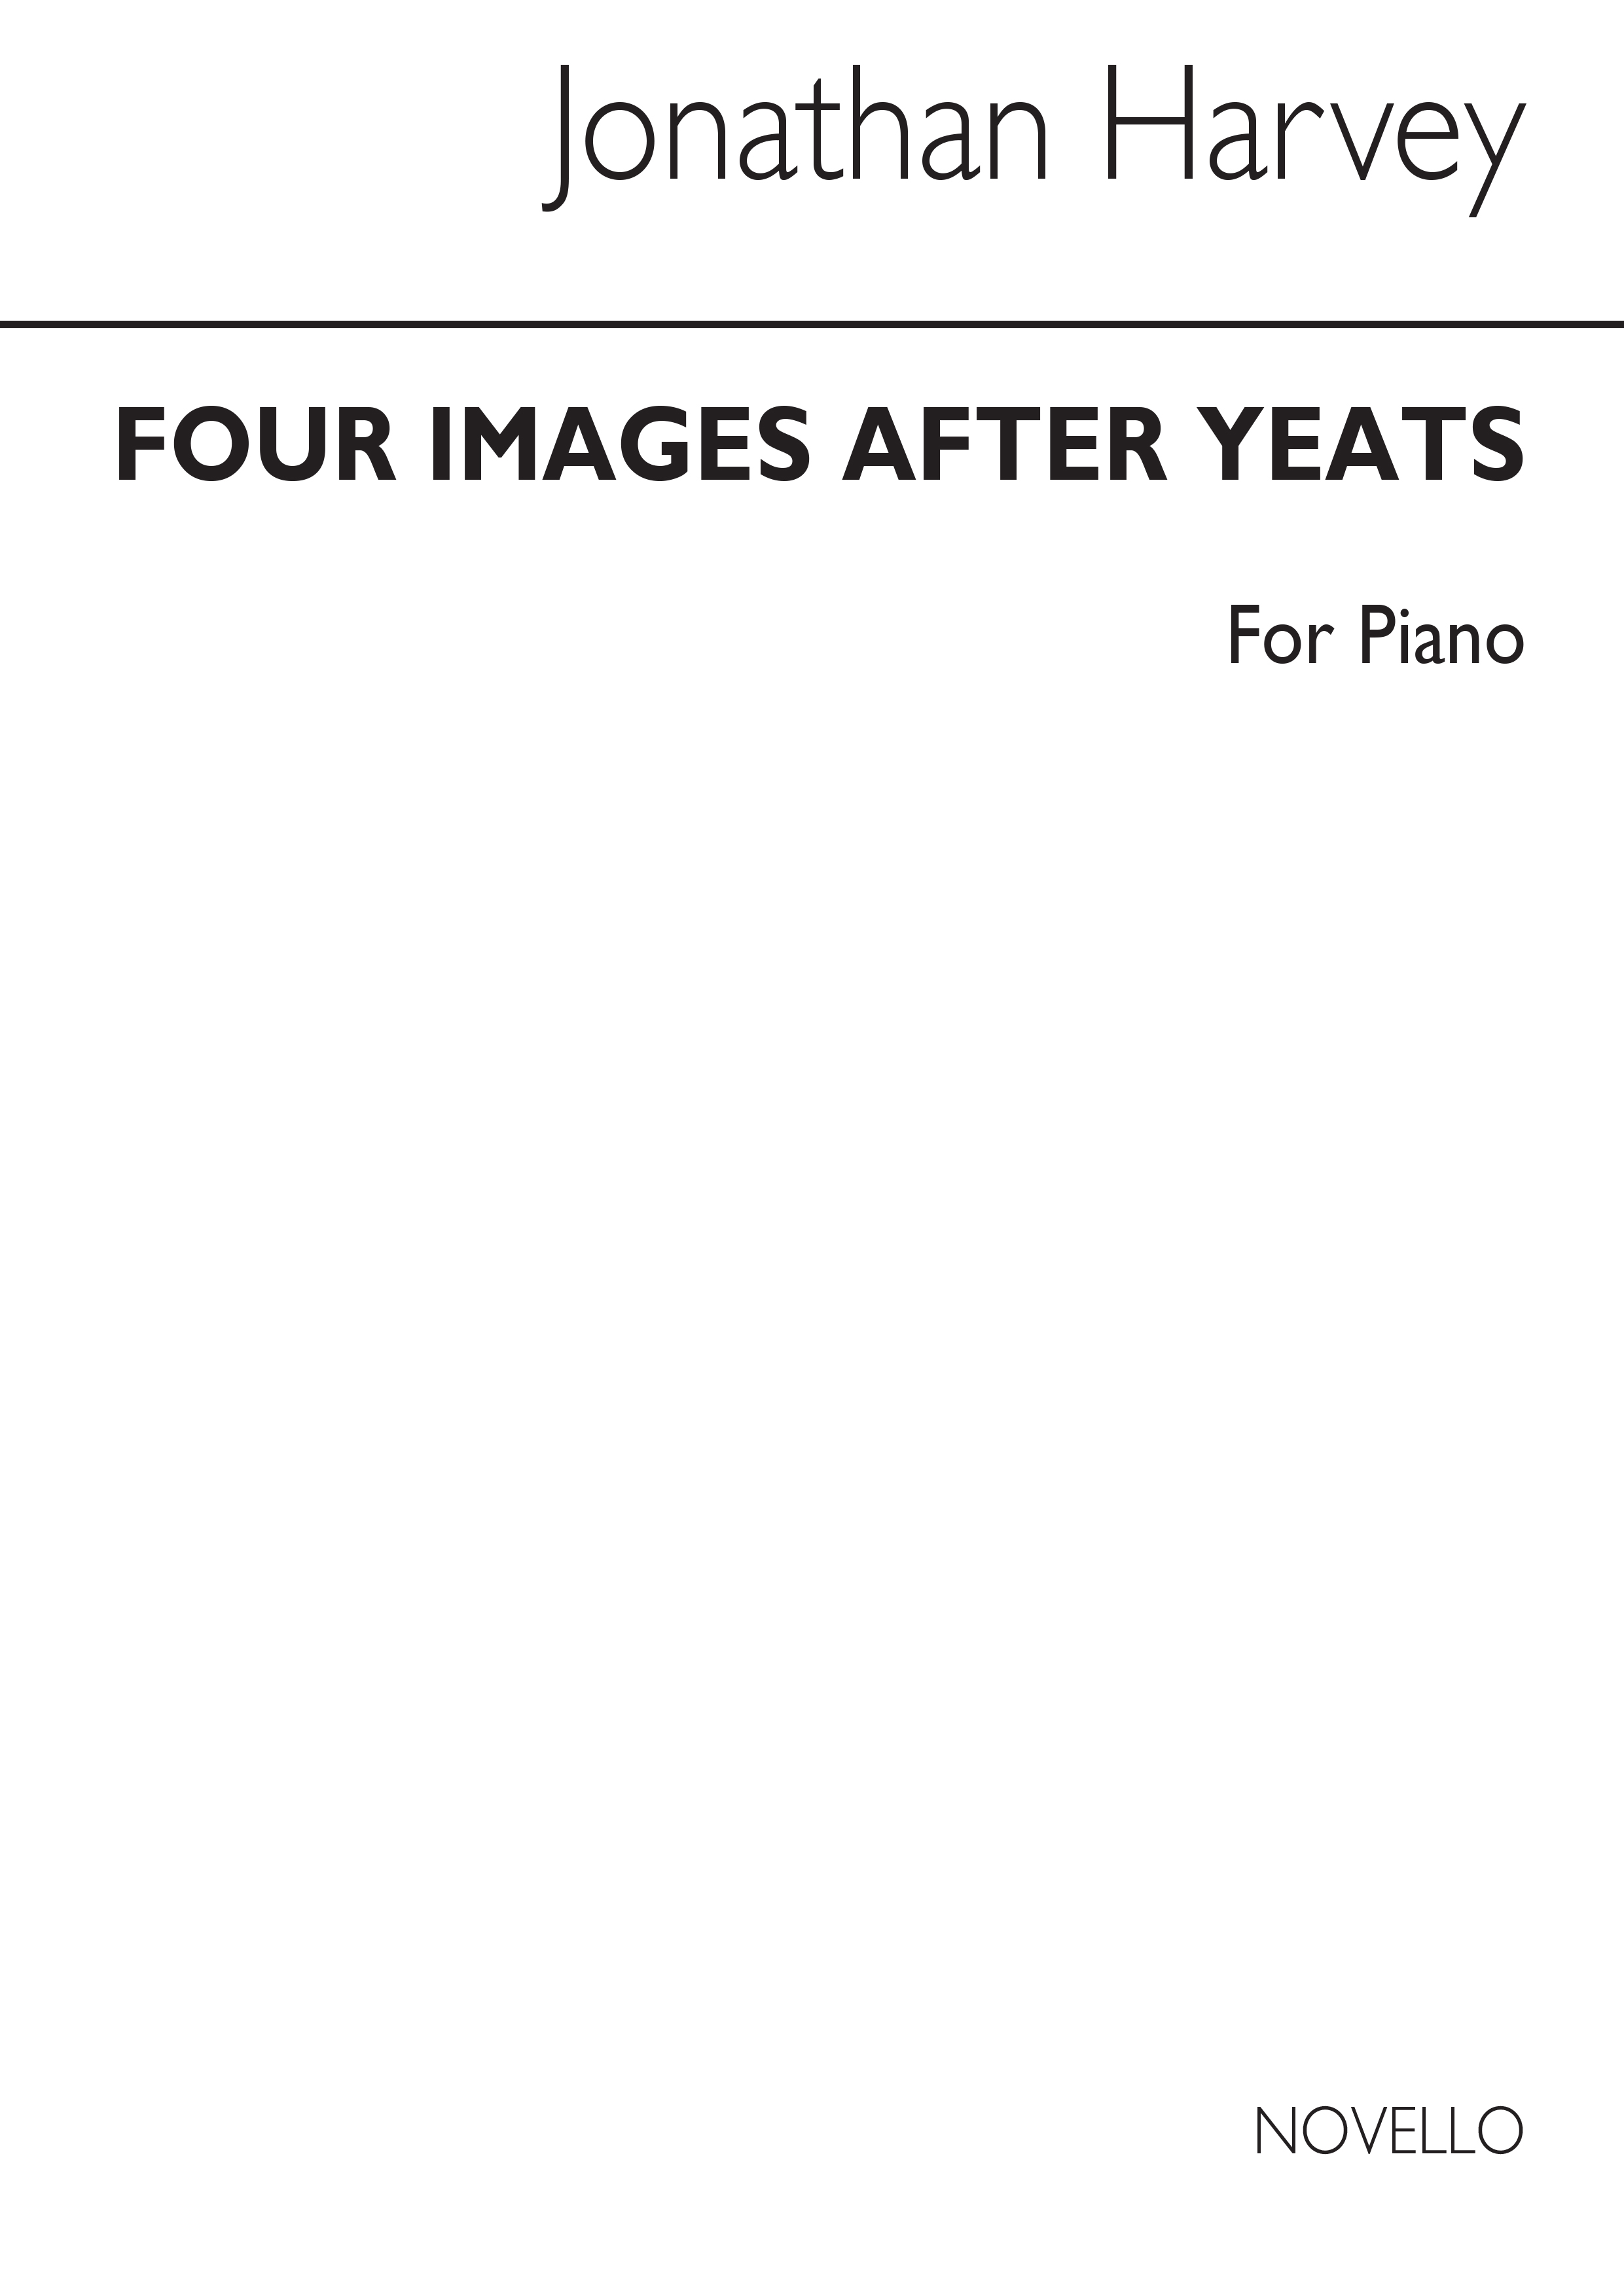 Jonathan Harvey: Four Images After Yeats for Piano